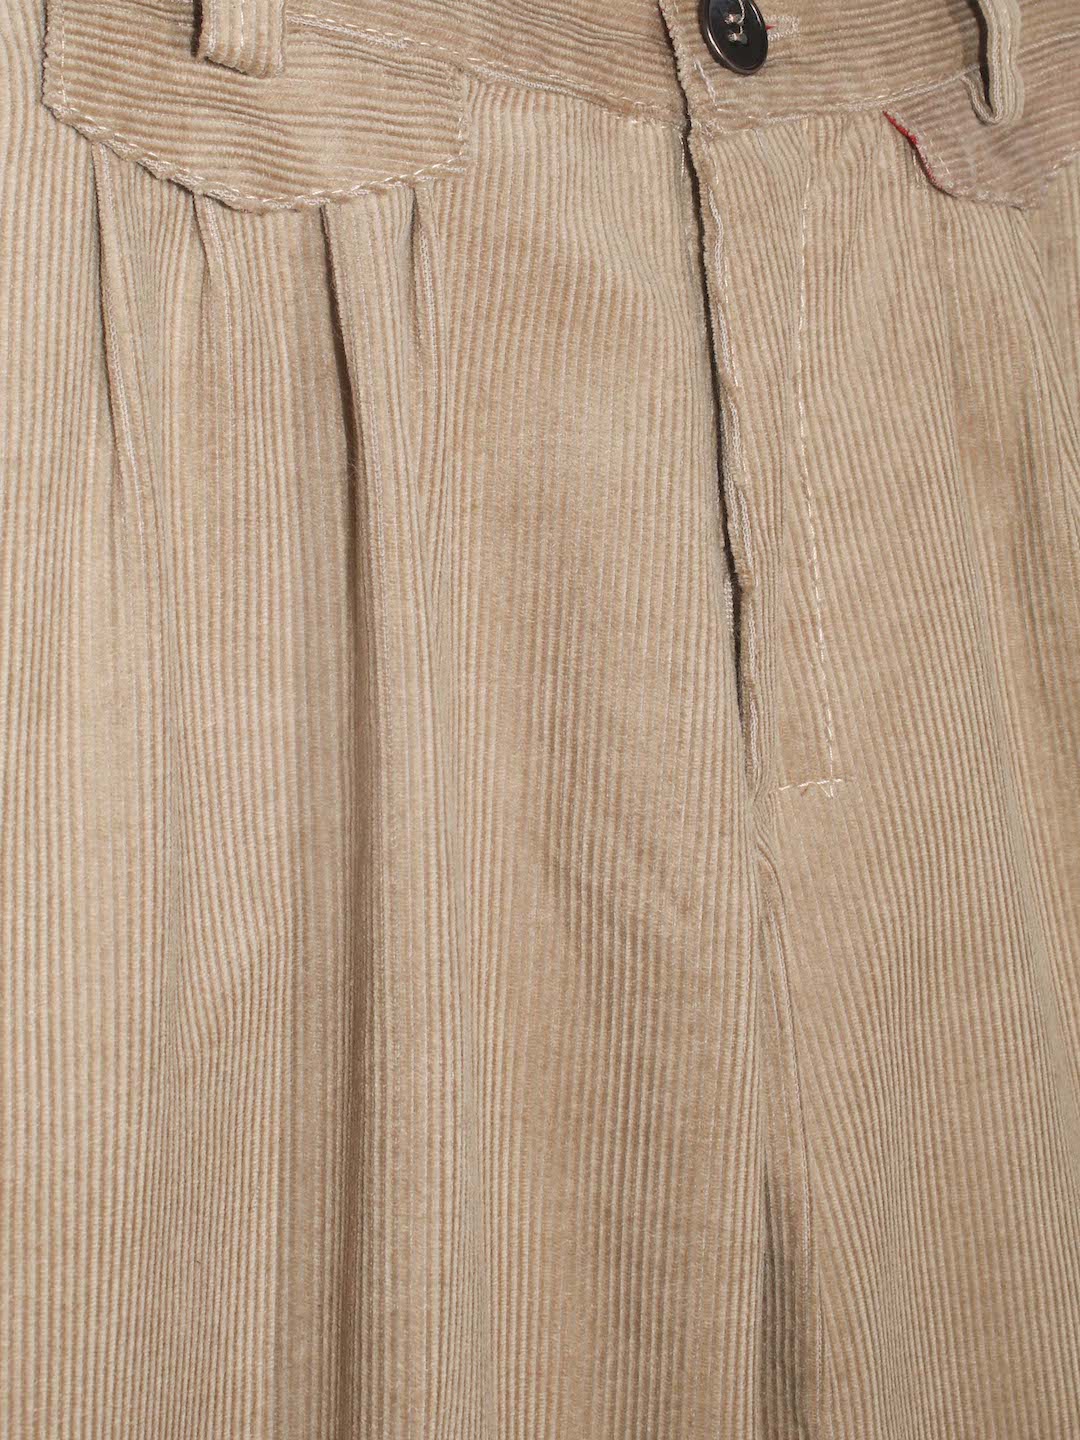 Argentine Bombacha Pants, horseback riding, traditional gaucho, Argentine cowboy attire. Soft and breathable fabrics, perfect pants for all-day wear. With a loose fit and elasticated waistband, they allow for plenty of movement, while the high waist provides extra coverage. Everyday look, perfect for both urban and countryside adventures. Cotton Corduroy, KIDS, PANTS, KIDSWEAR, BOTTOM, KIDS PANTS